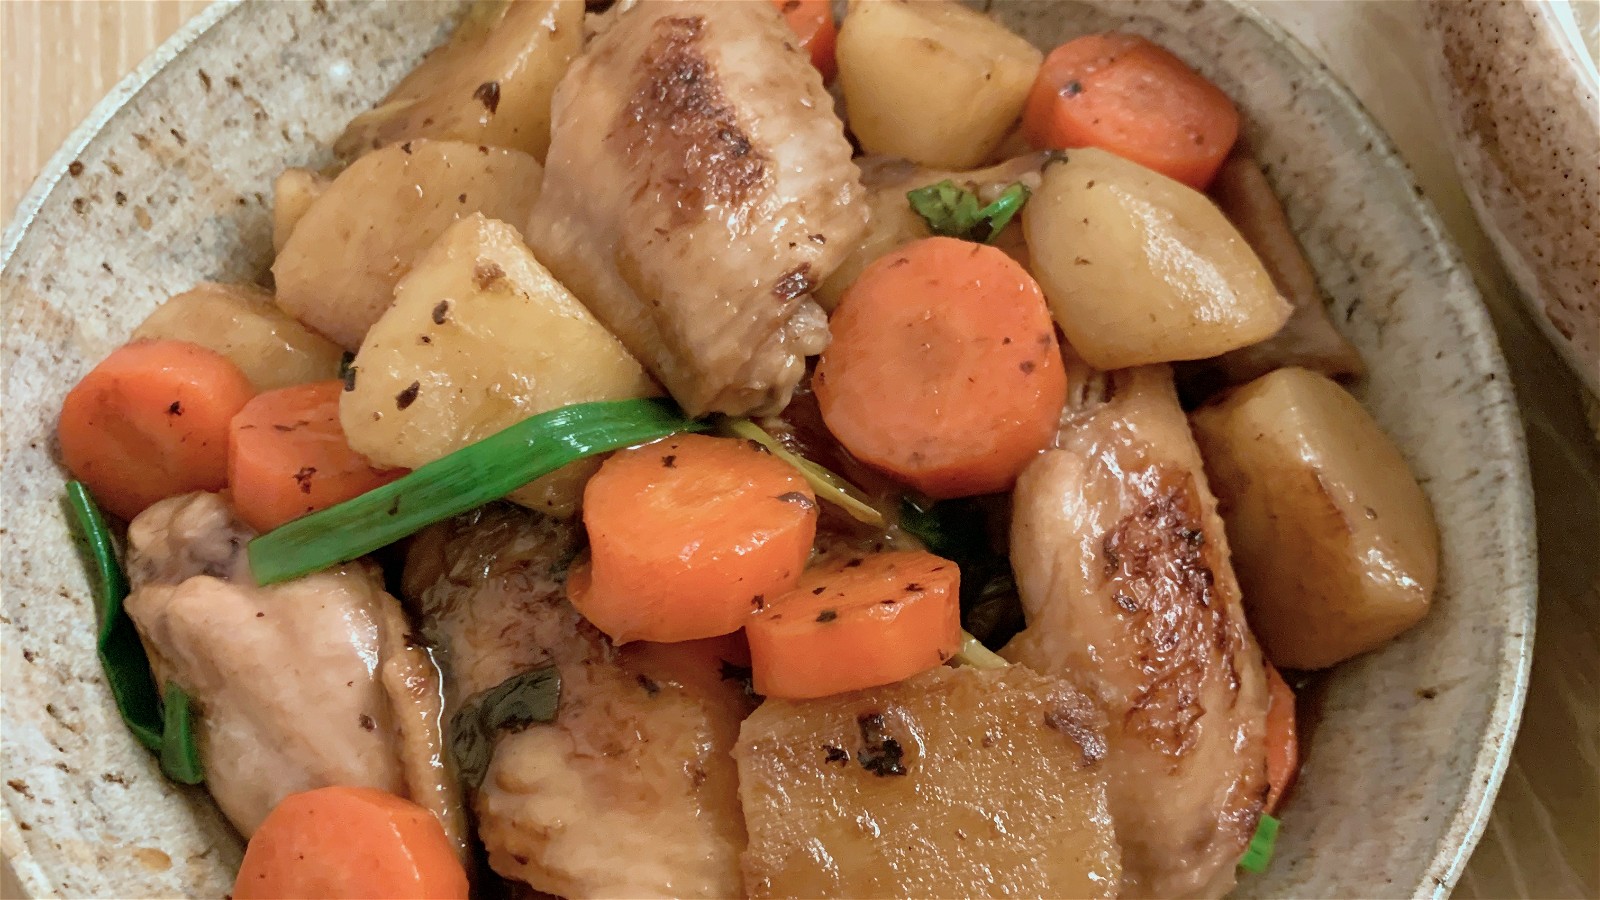 Image of Braised Chicken Wings with Potatoes (薯仔炆雞翼)